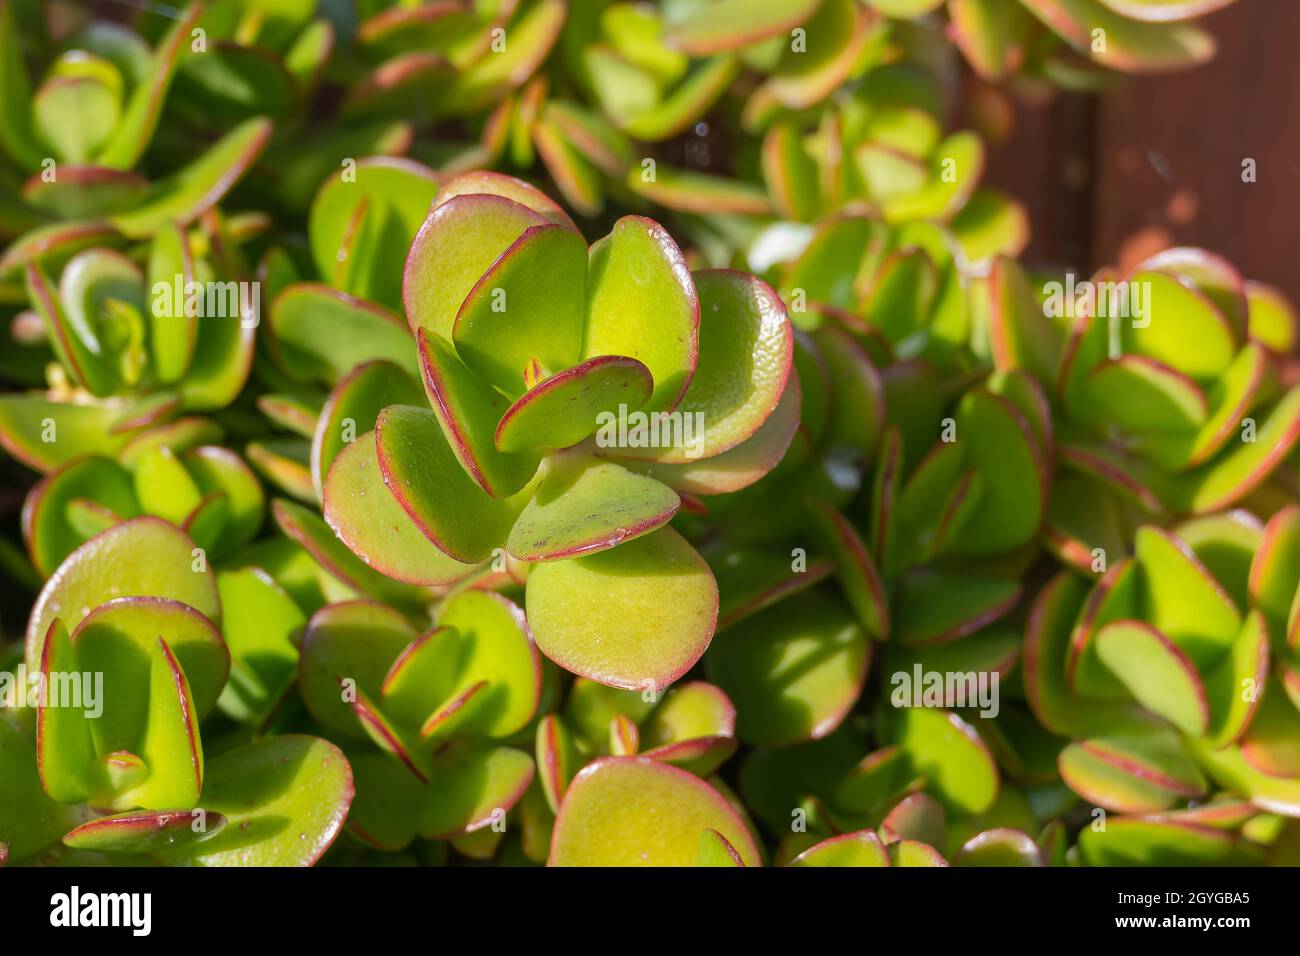 jade plant leaves seen close up in sunlight outdoors Stock Photo